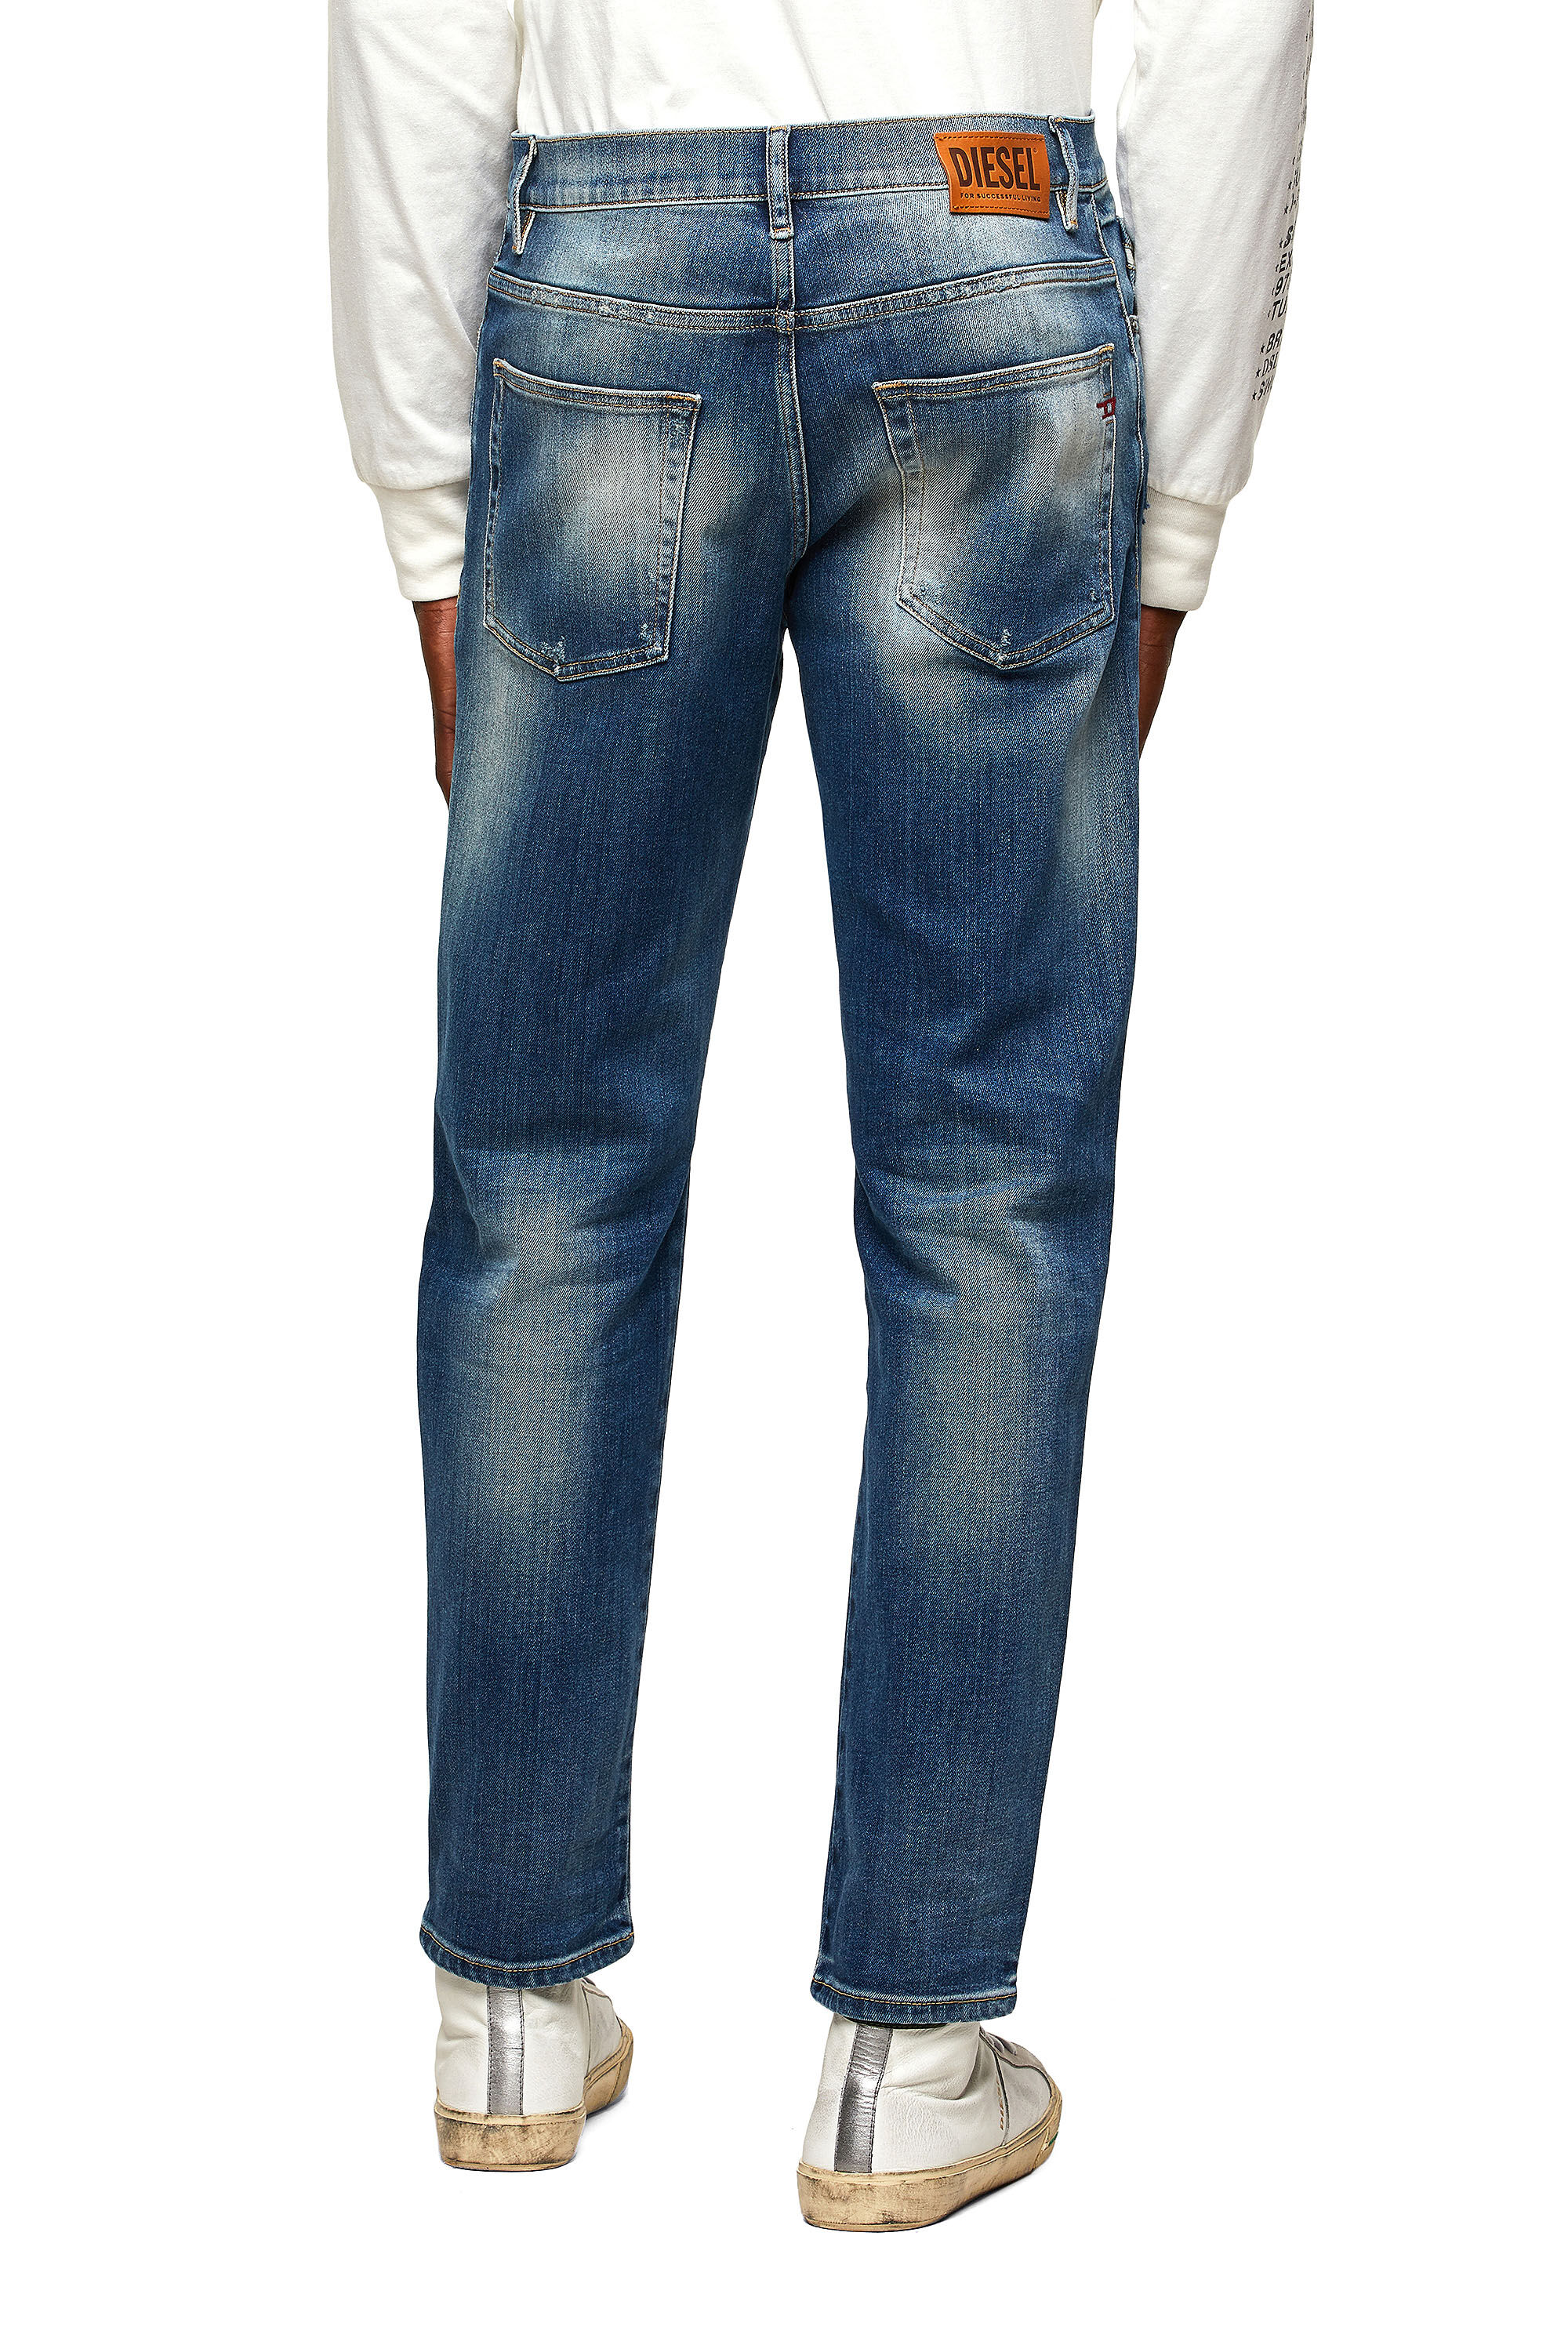 Diesel - 2005 D-FINING 009RS Tapered Jeans,  - Image 5